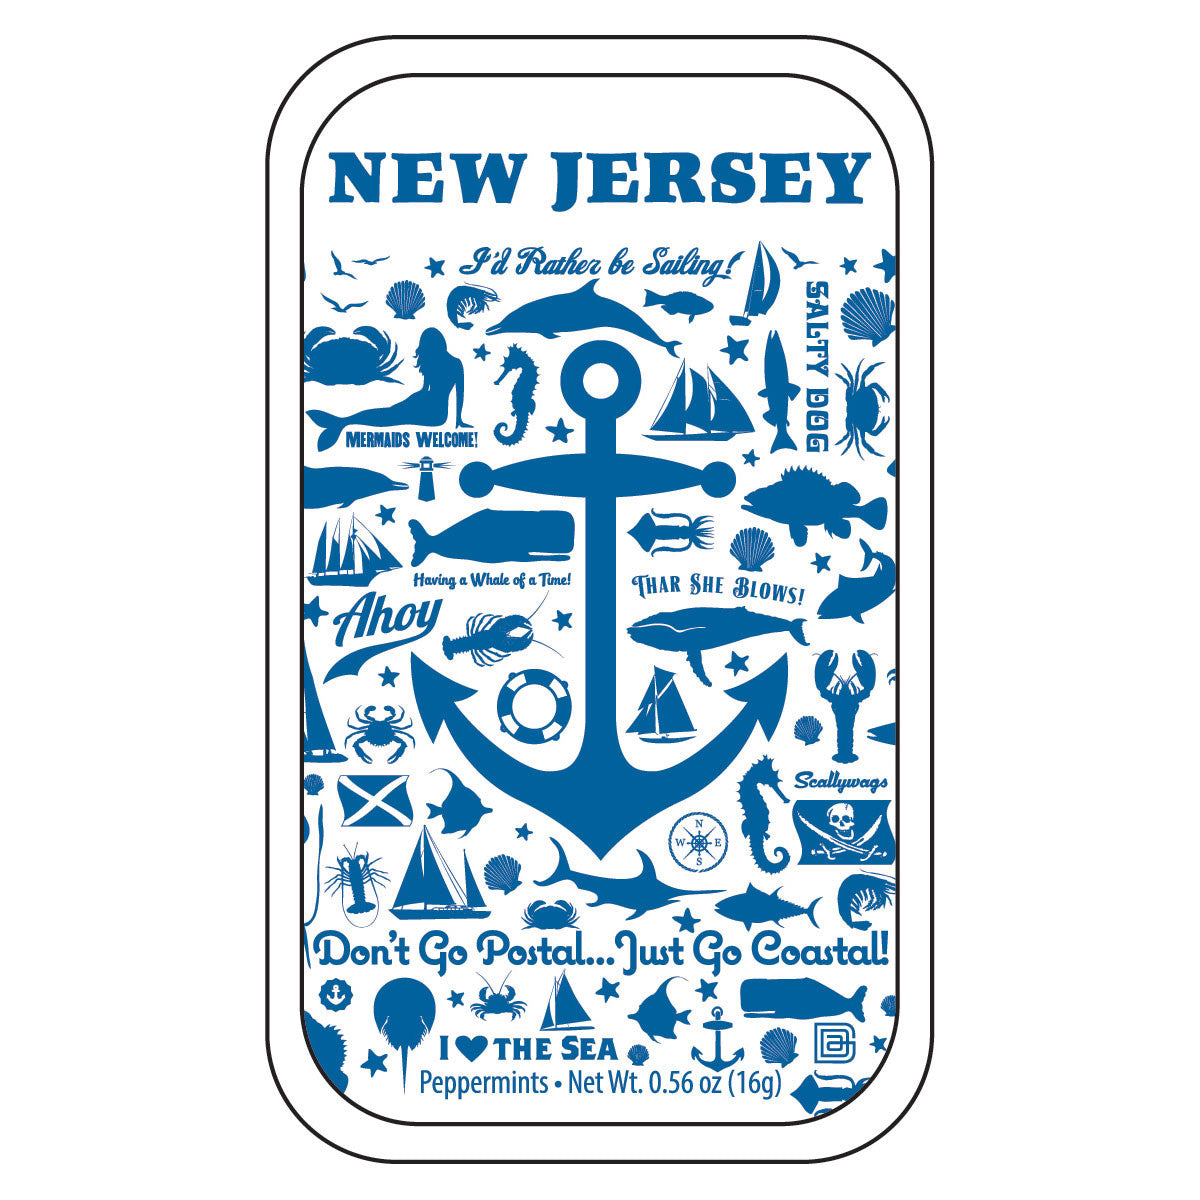 Anchor Pattern New Jersey - 0207A